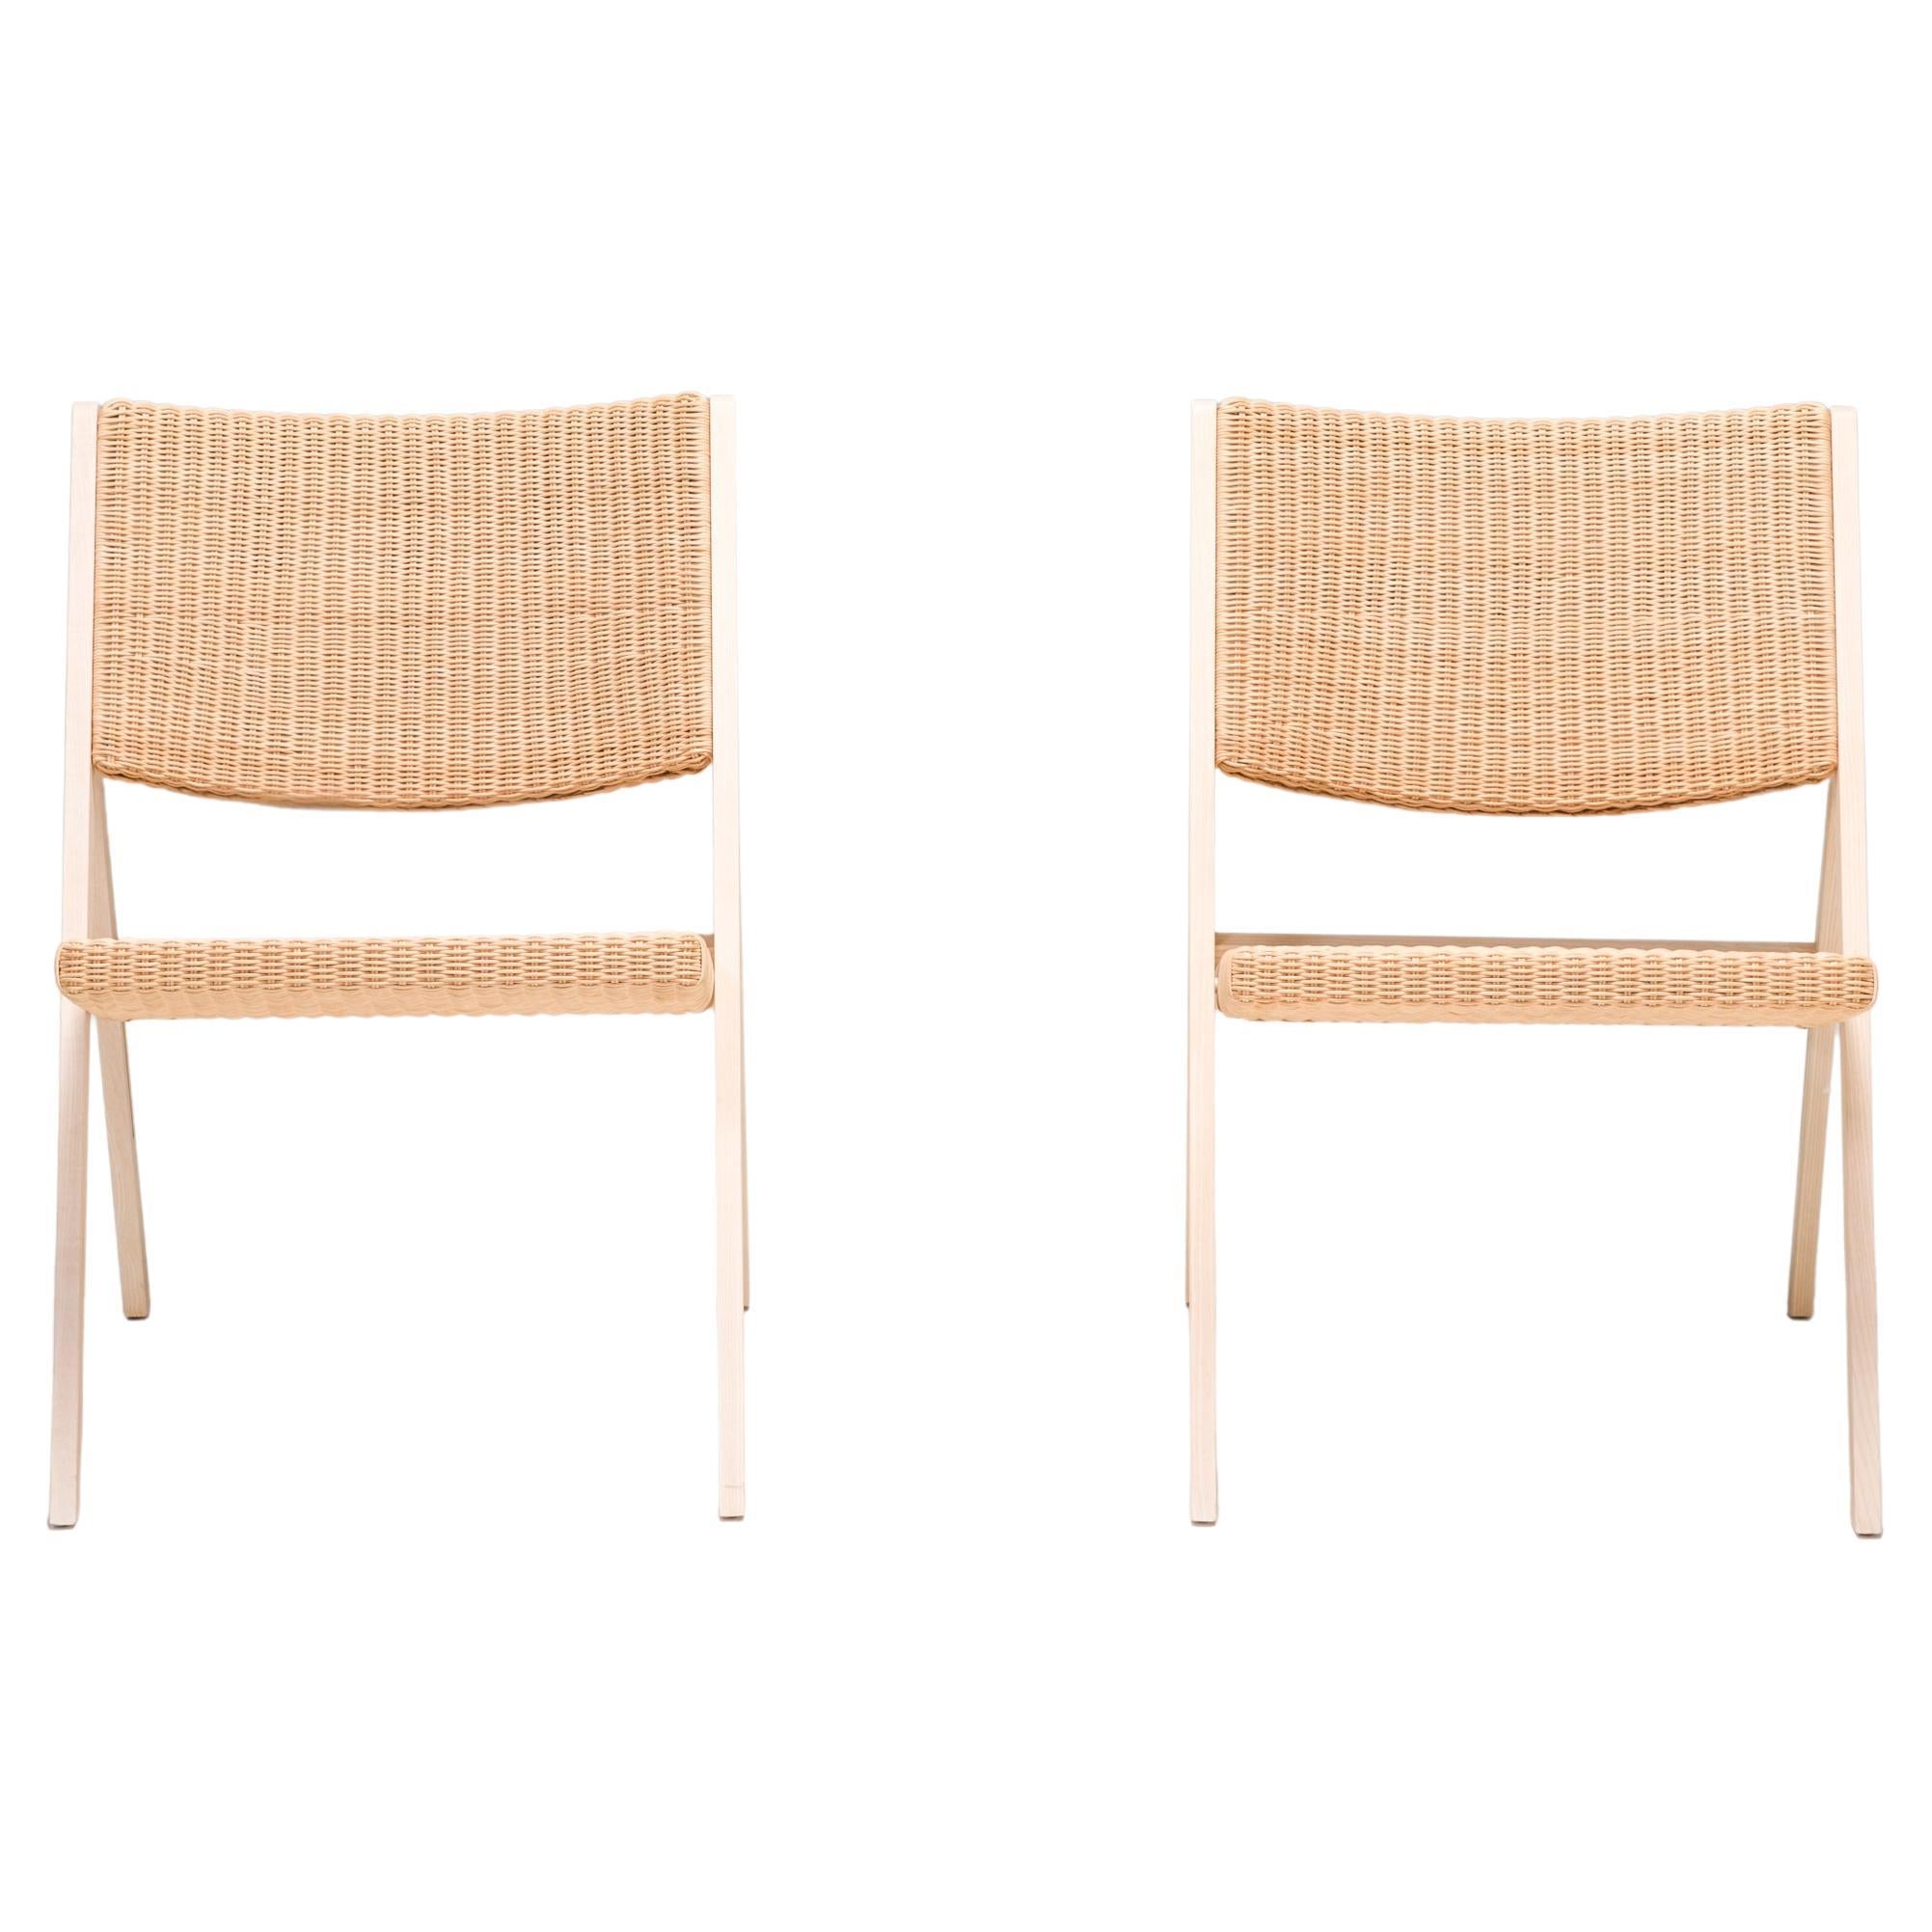 Gio Ponti for Molteni&C D.270.1 Wicker Folding Chairs, Set of 2 For Sale